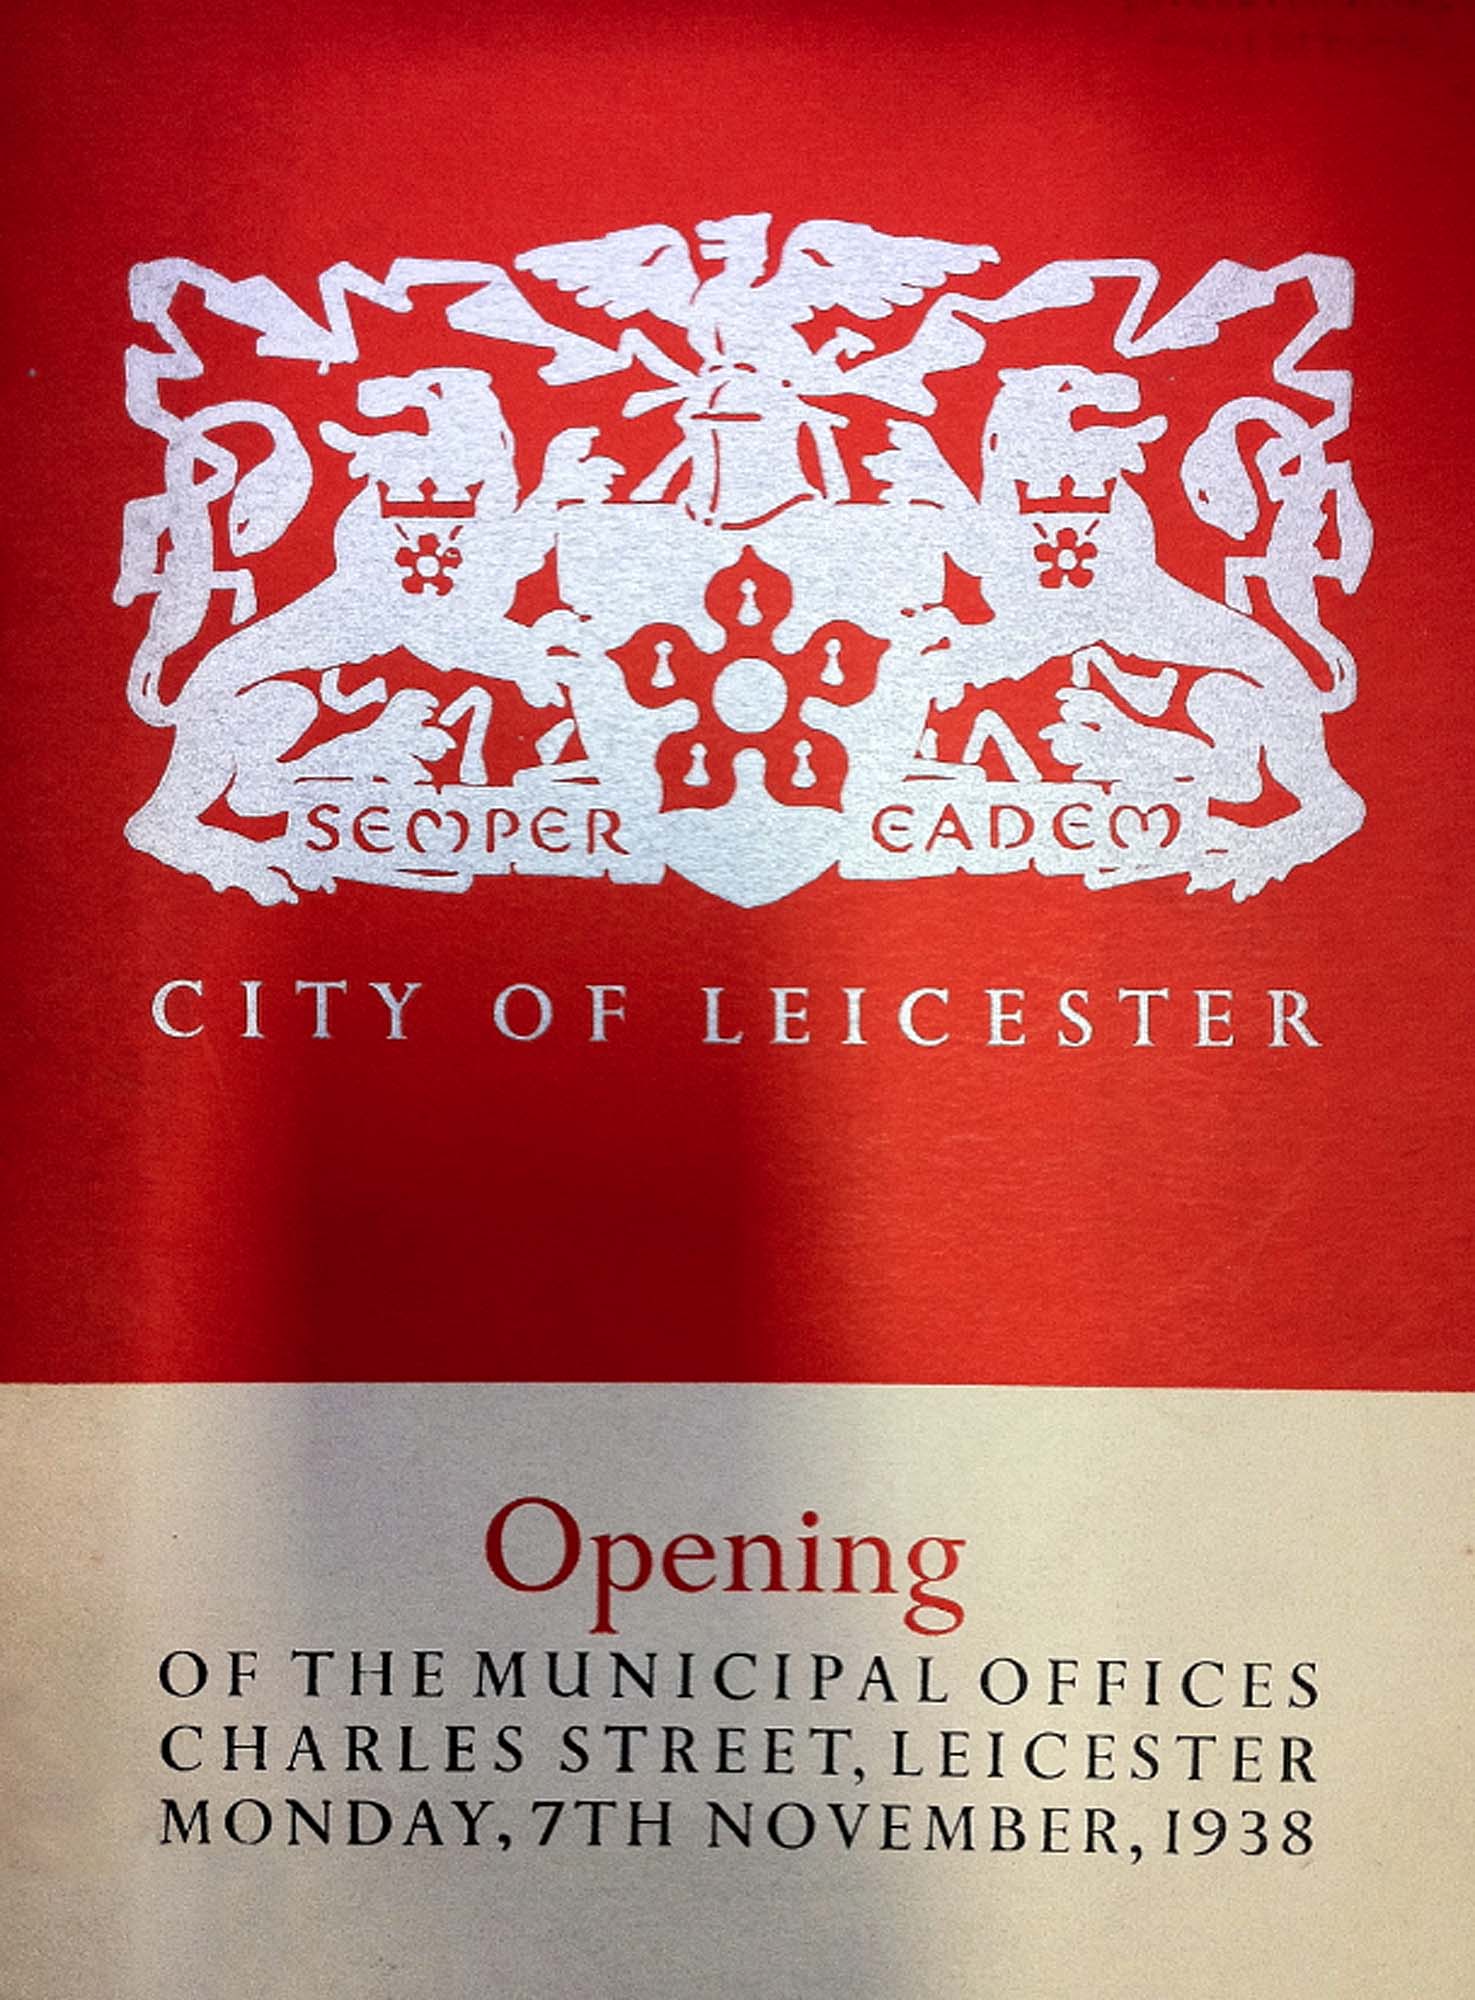 A booklet celebrating the opening of the new Municipal Offices -